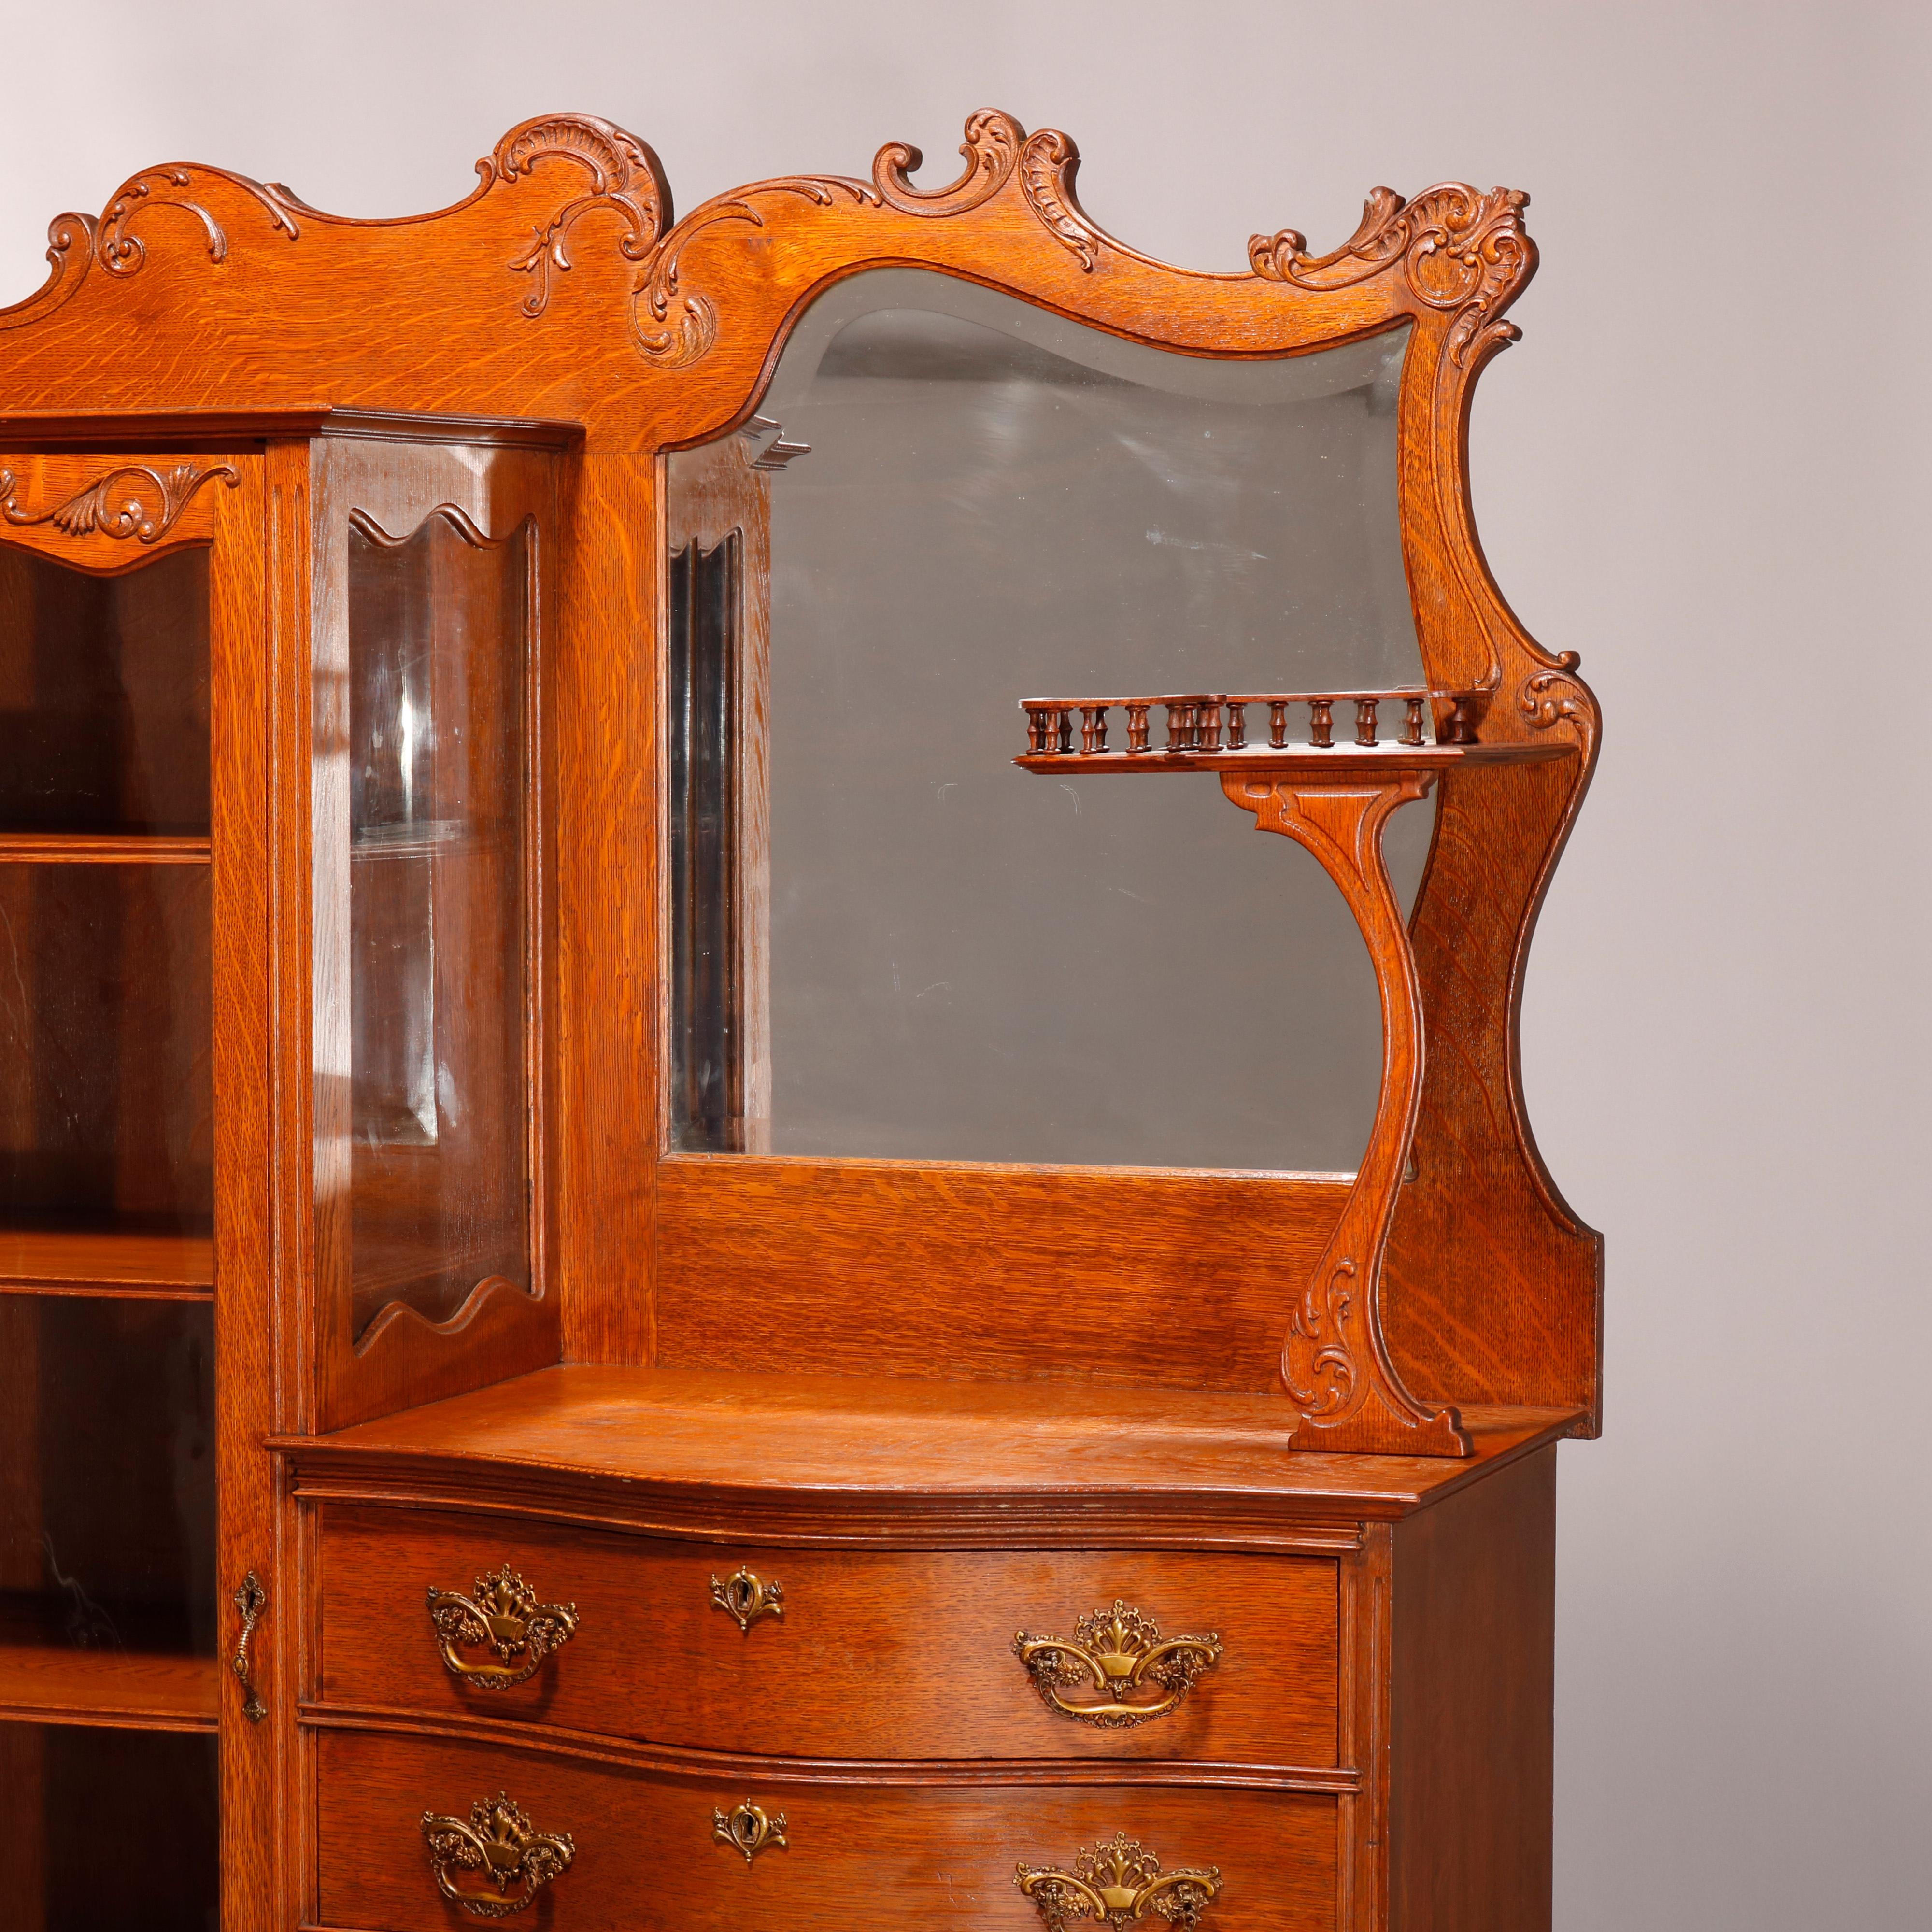 An antique china buffet in the manner of RJ Horner by Rockford Standard Furniture Co., Rockford, Illinois offers oak construction with foliate and scroll carved crest surmounting side-by-side with shelved single door vitrine aside server having